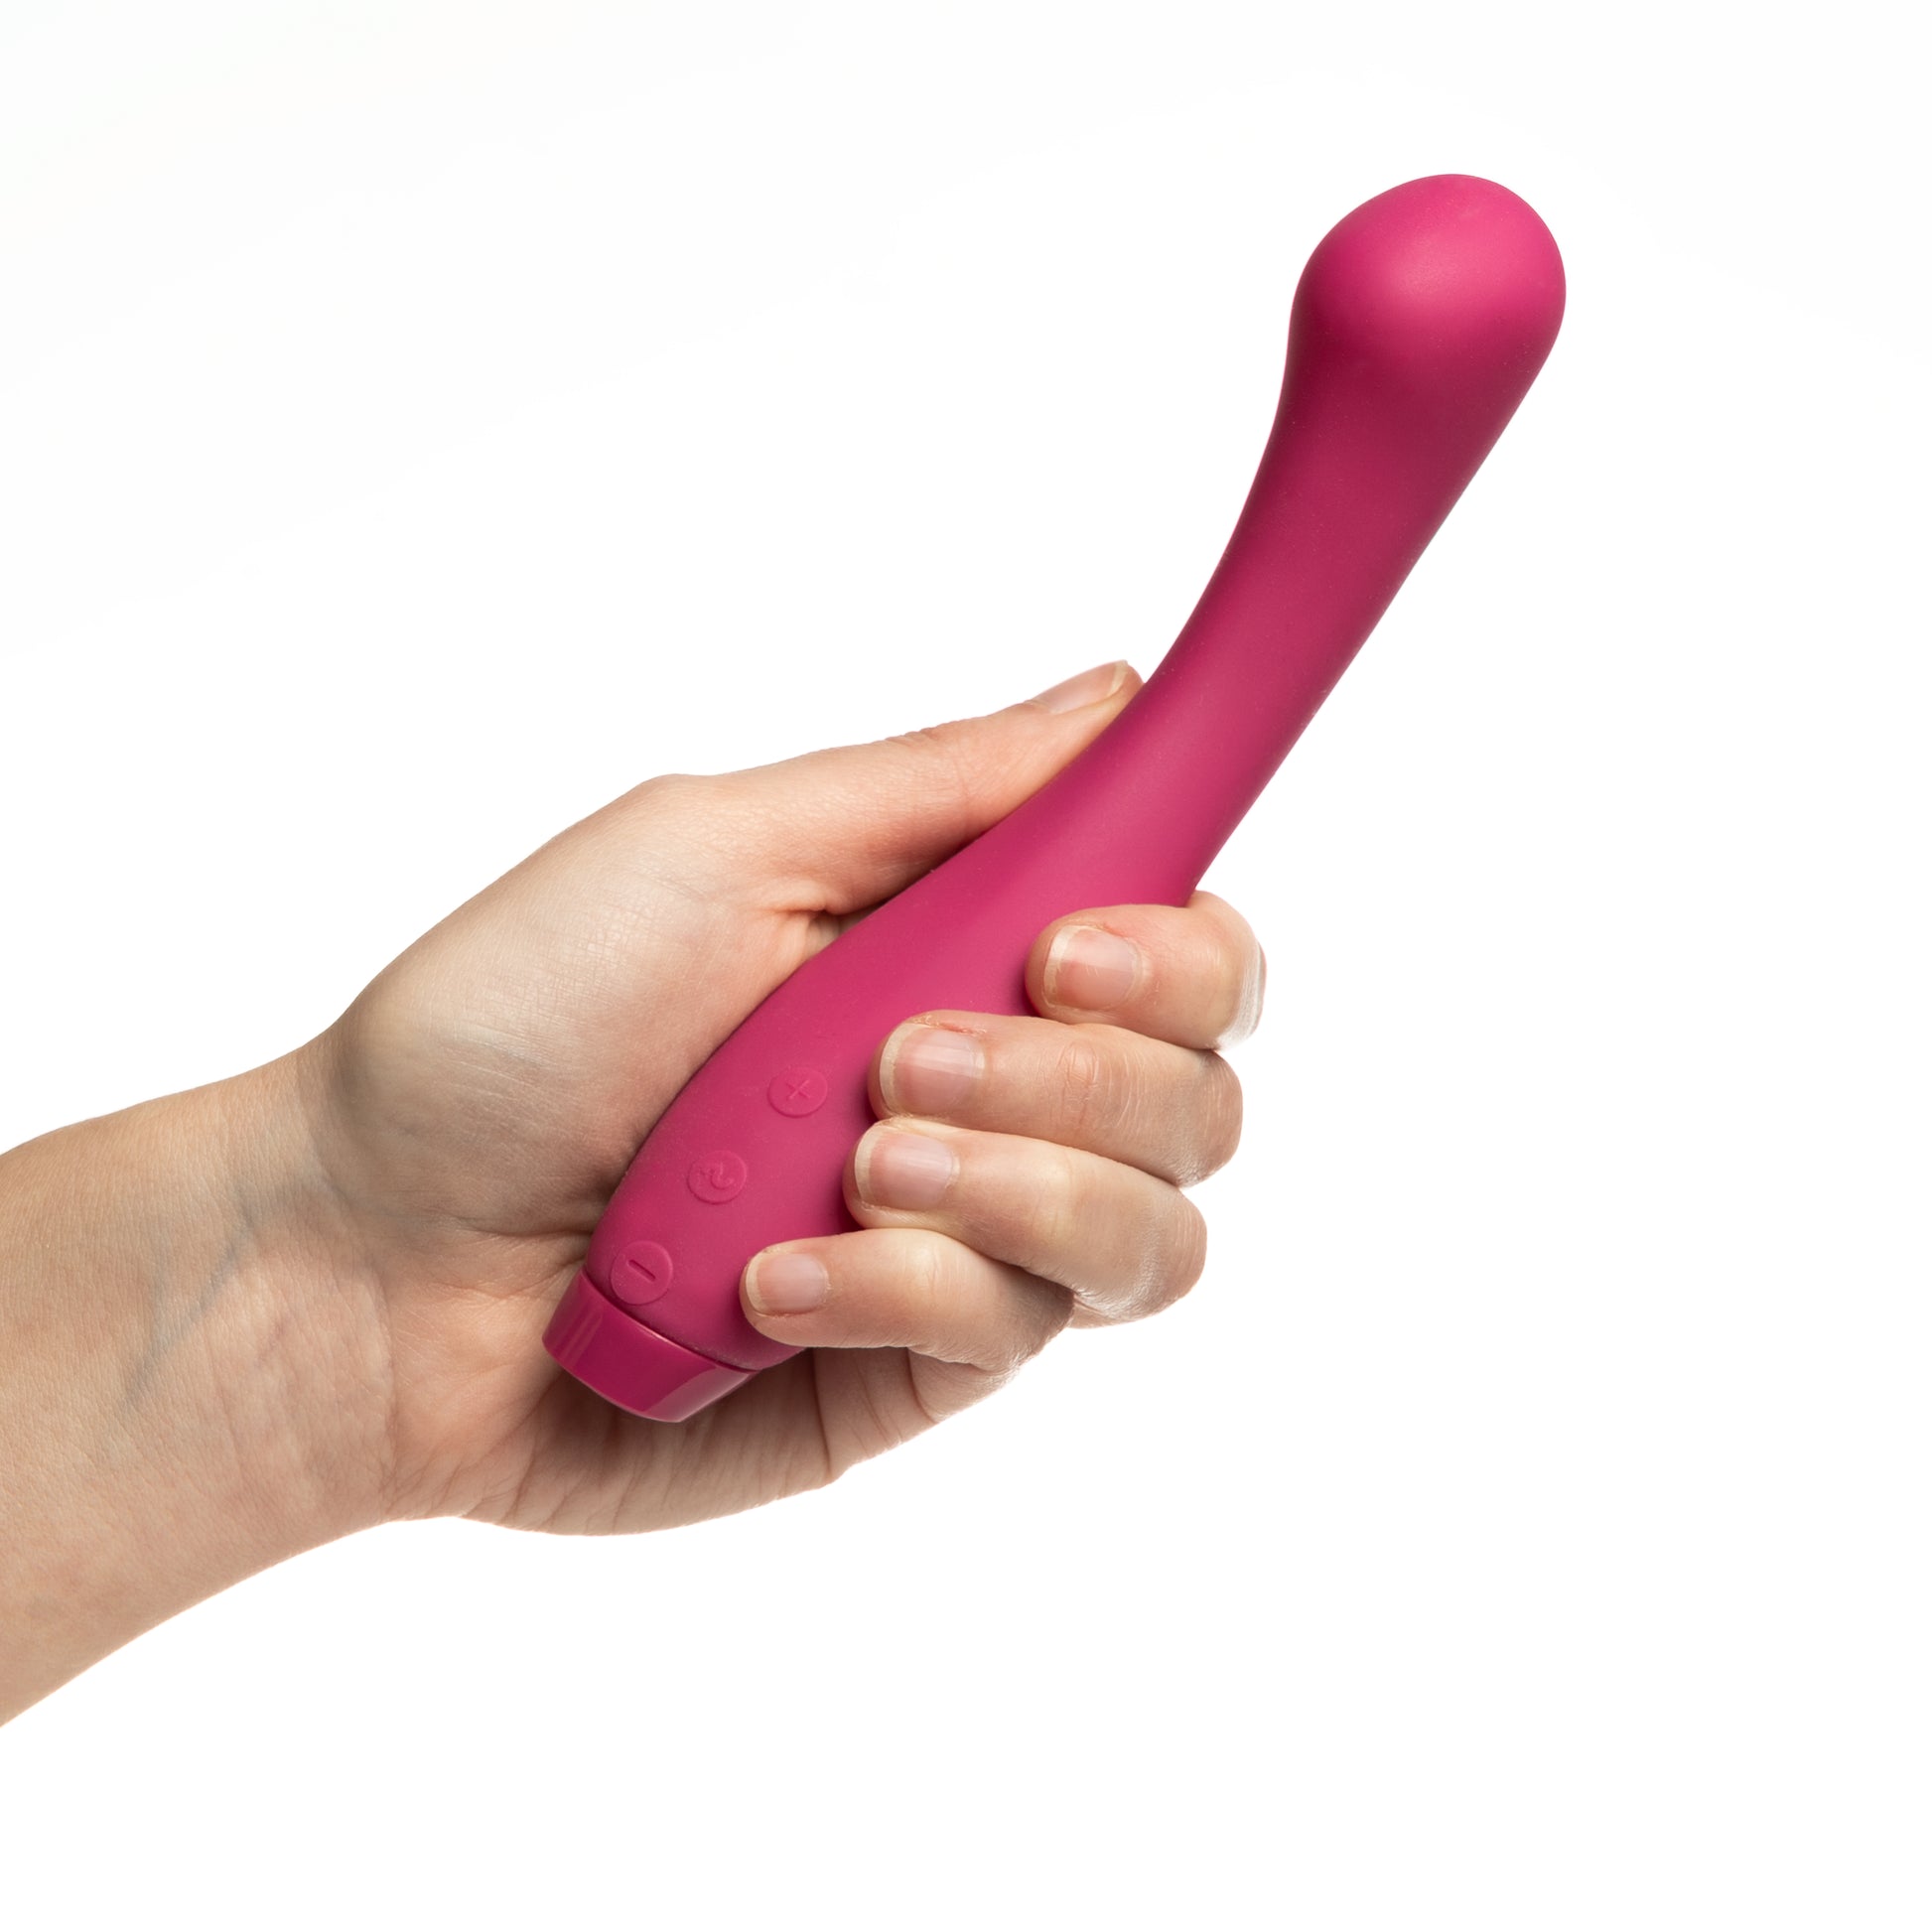 Pink Juno Vibrator in hand on white background